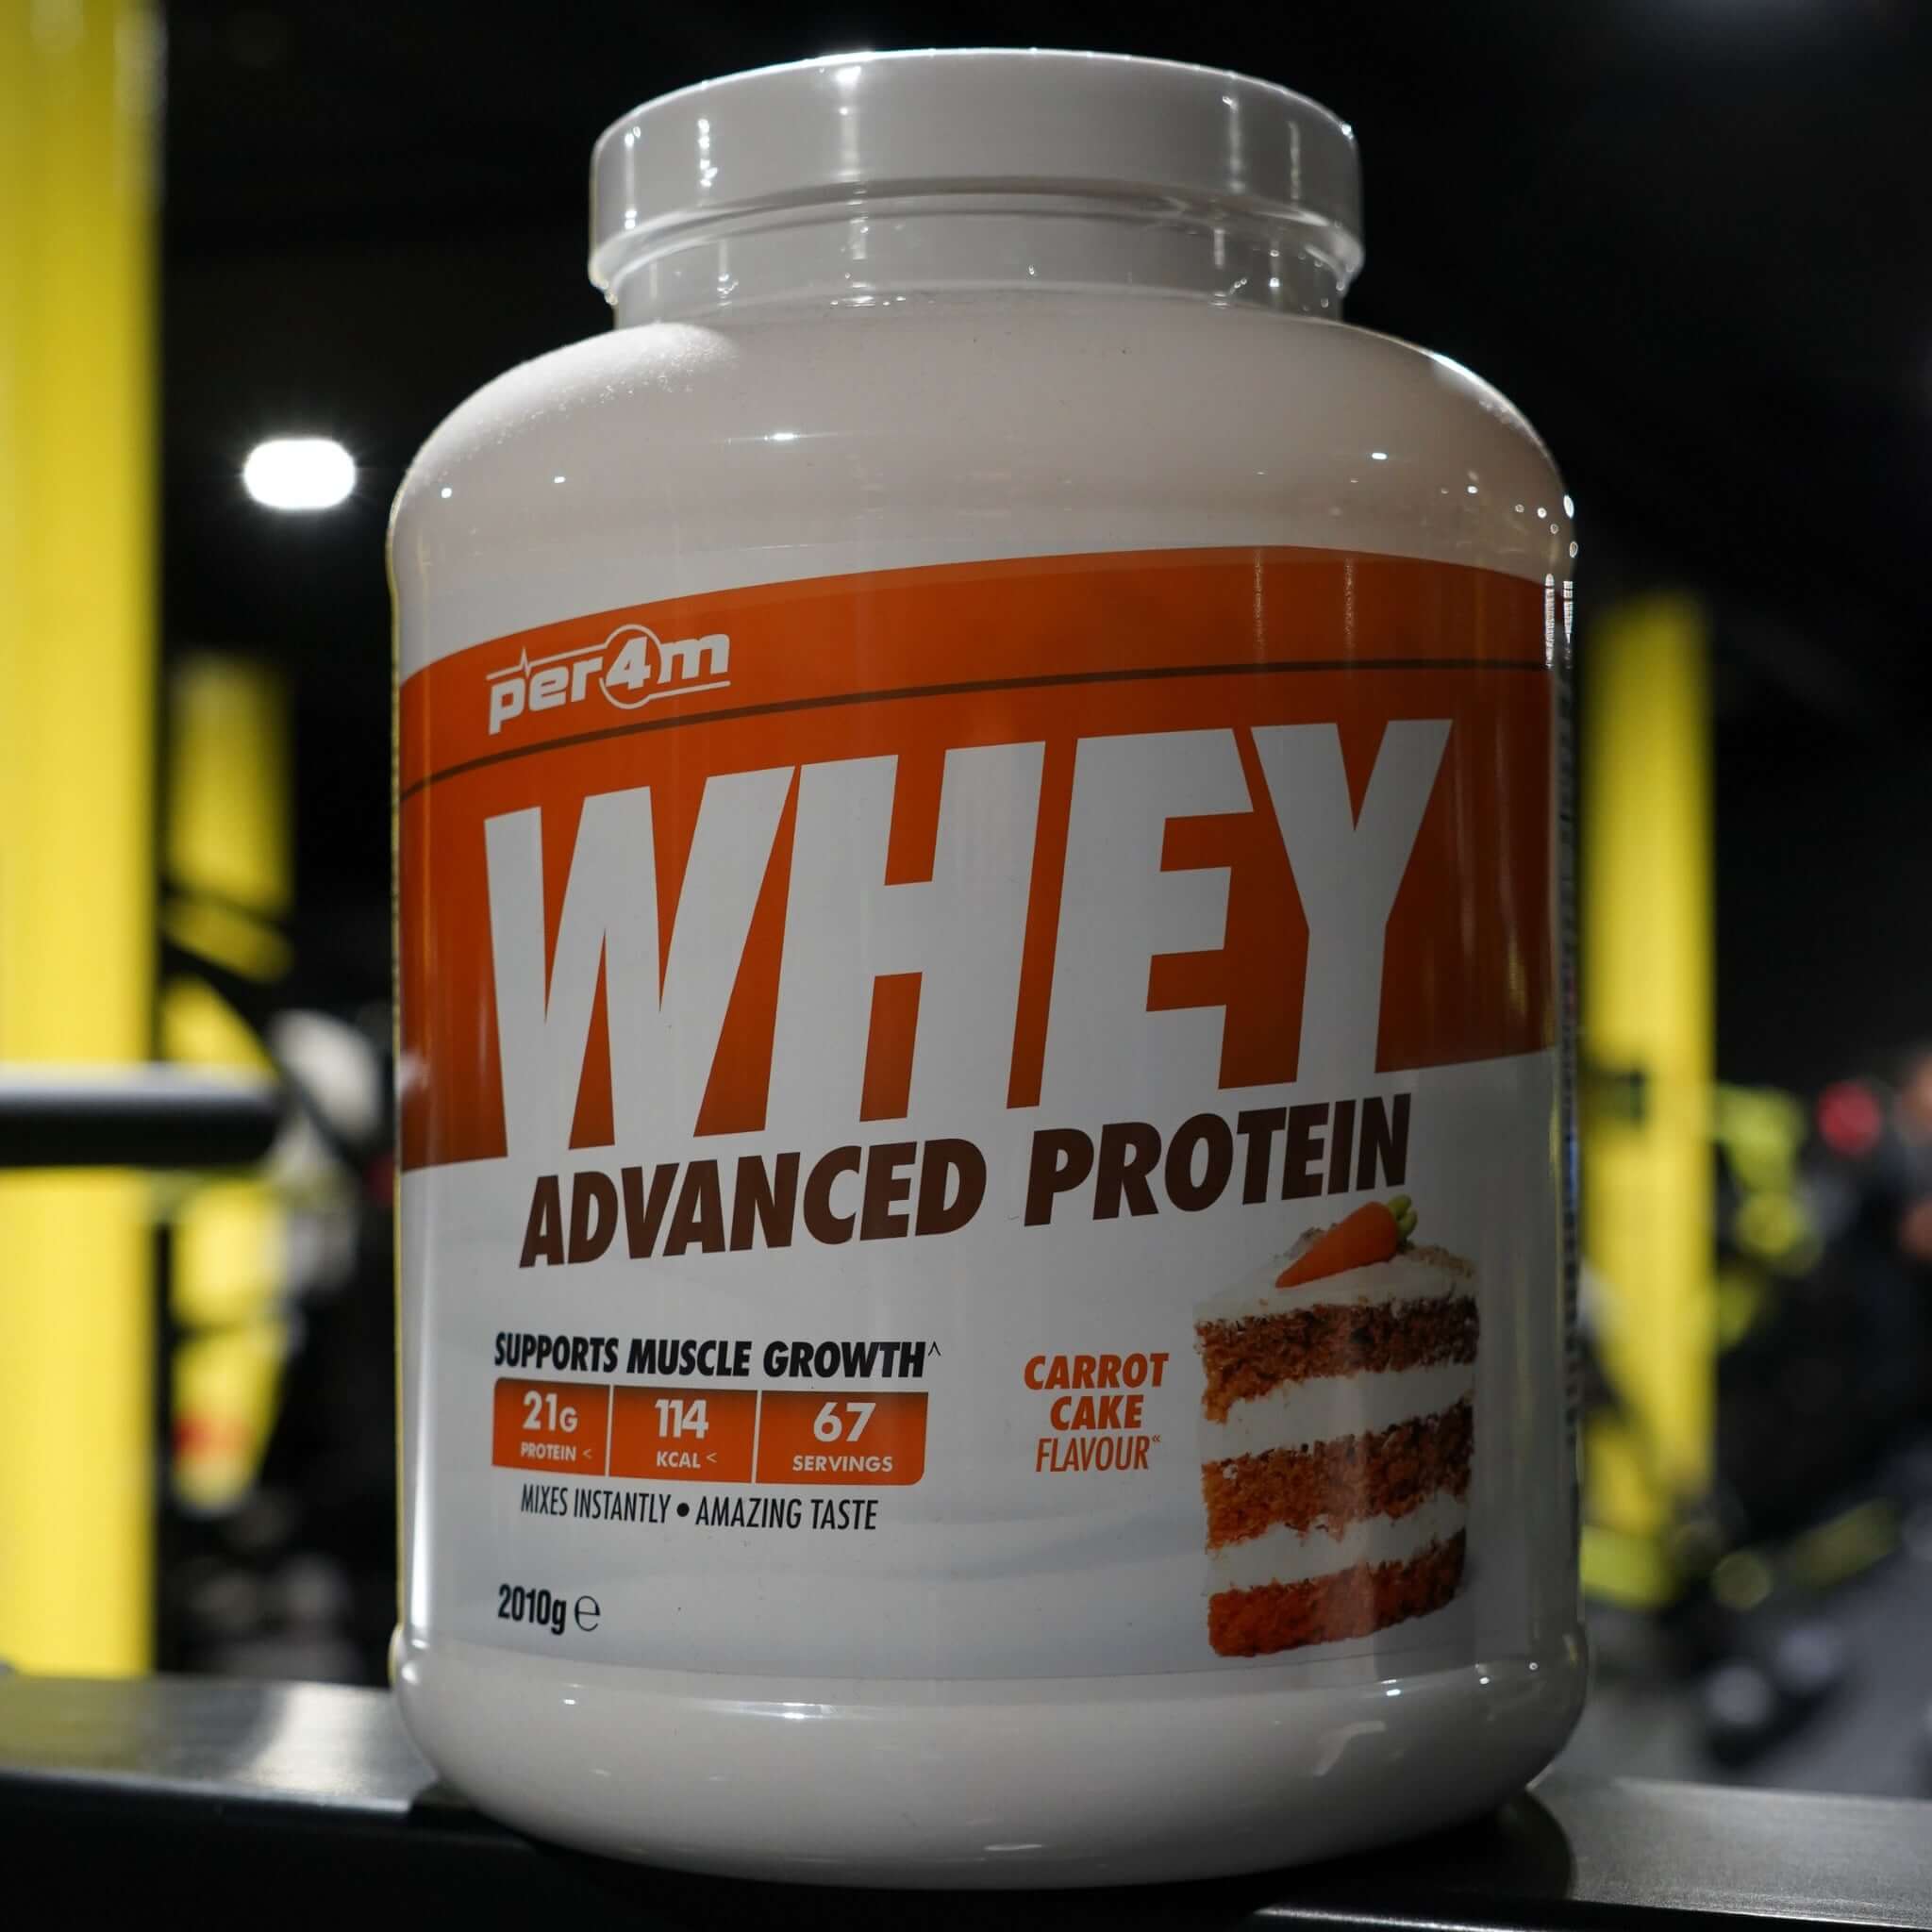 Per4m Whey Advanced Protein Carrot Cake Flavour